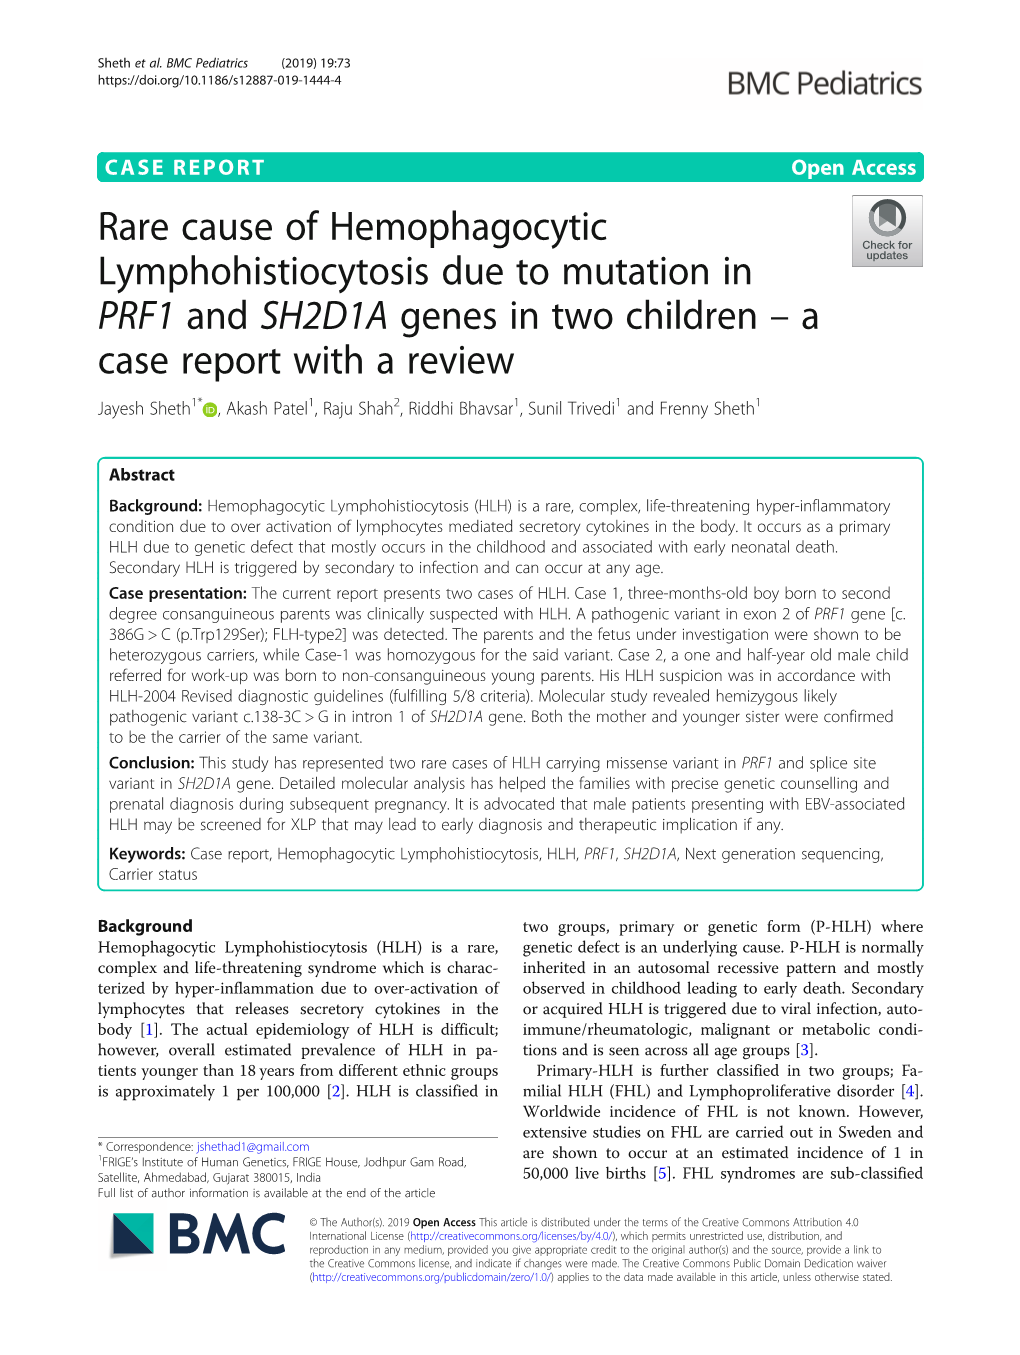 Rare Cause of Hemophagocytic Lymphohistiocytosis Due to Mutation in PRF1 and SH2D1A Genes in Two Children – a Case Report With